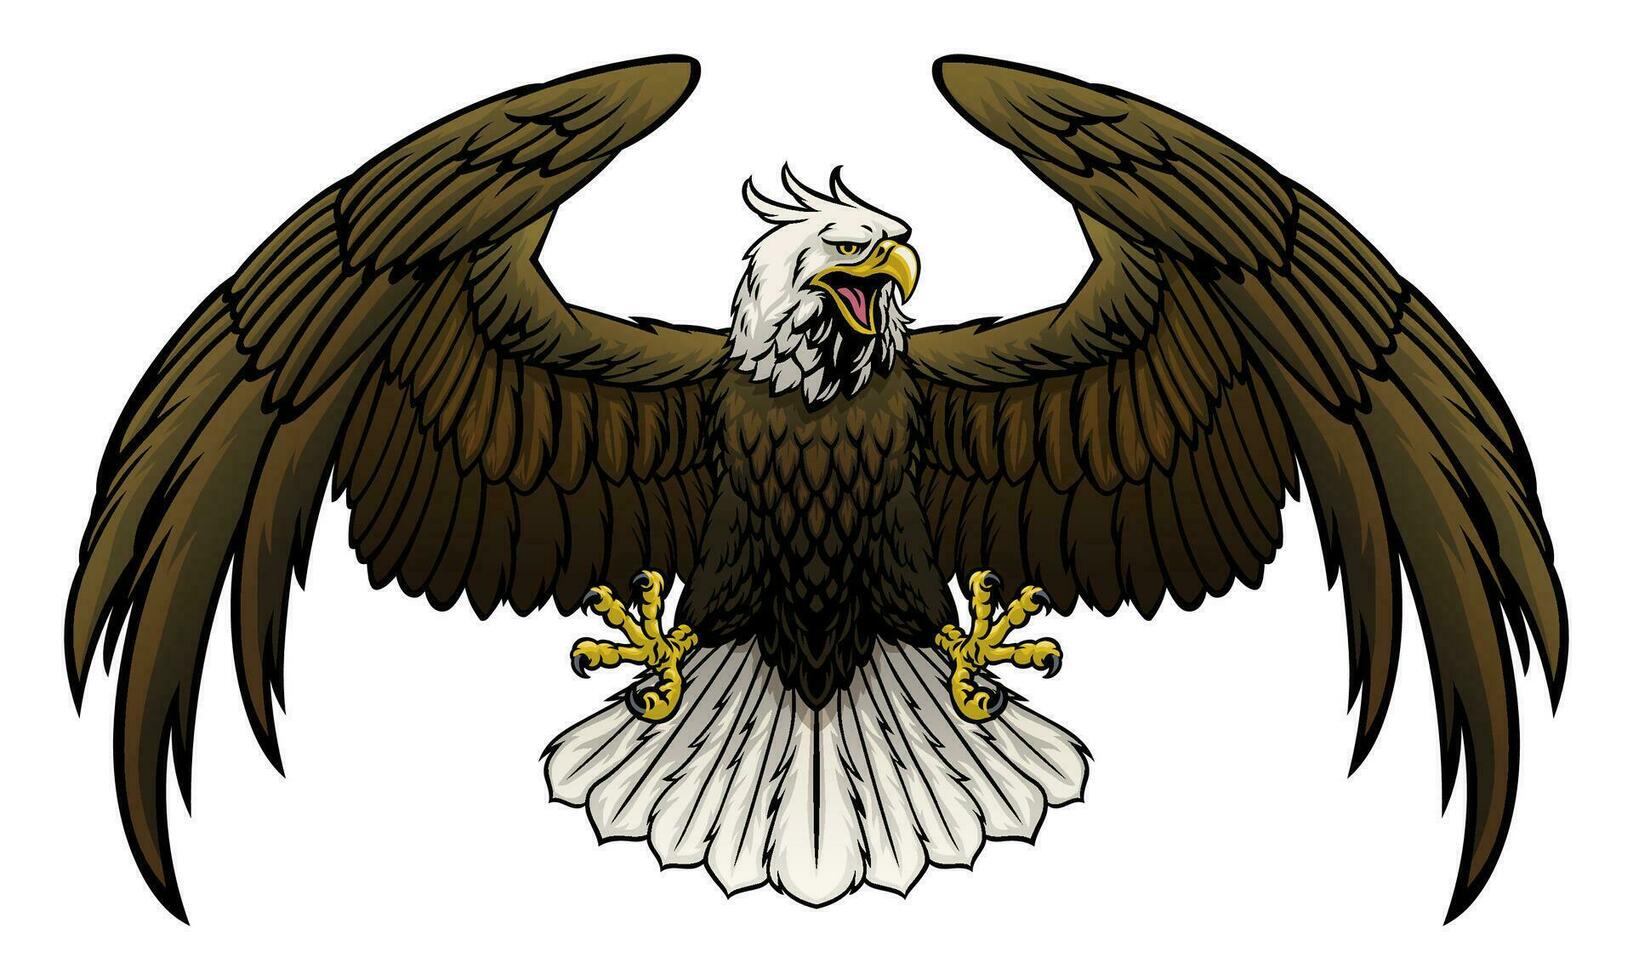 Flying Angry Bald Eagle Illustration vector